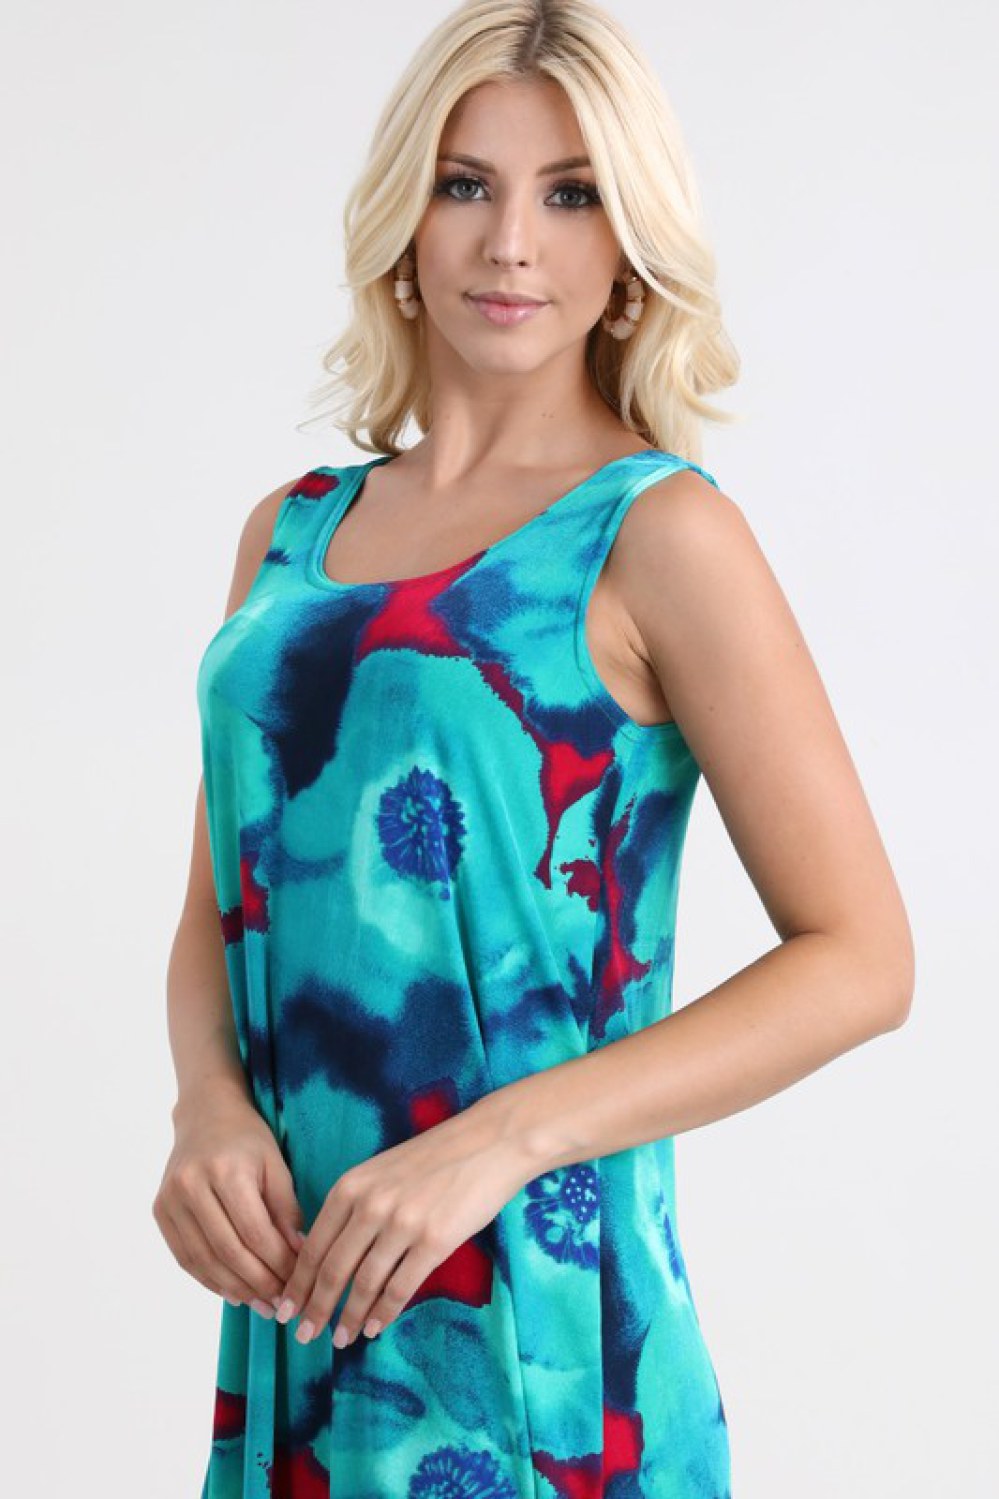 Made in USA | Perfect Vacation Dress | Stretchy Jersey Tank Dress Turquoise Floral Pattern | Made in USA | Classy Cozy Cool Women's Clothing Boutique